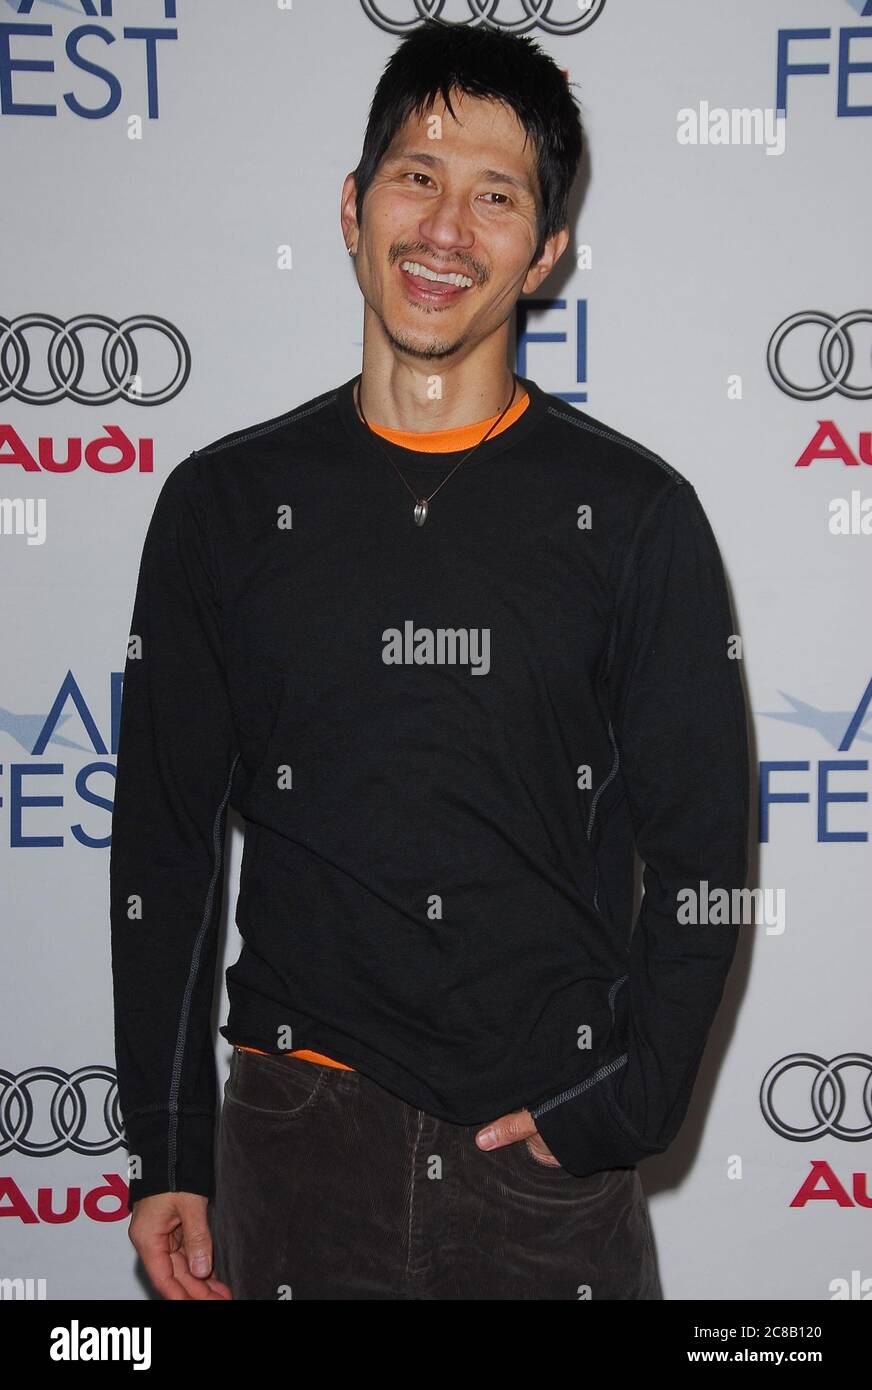 Filmmaker Greg Araki at the AFI FEST 2007 Presents a Screening of 'Smiley Face' held at the AFI Fest Rooftop Village of the Arclight Cinemas in Hollywood, CA. The event took place on Saturday, November 10, 2007. Photo by: SBM / PictureLux - File Reference # 34006-9924SBMPLX Stock Photo